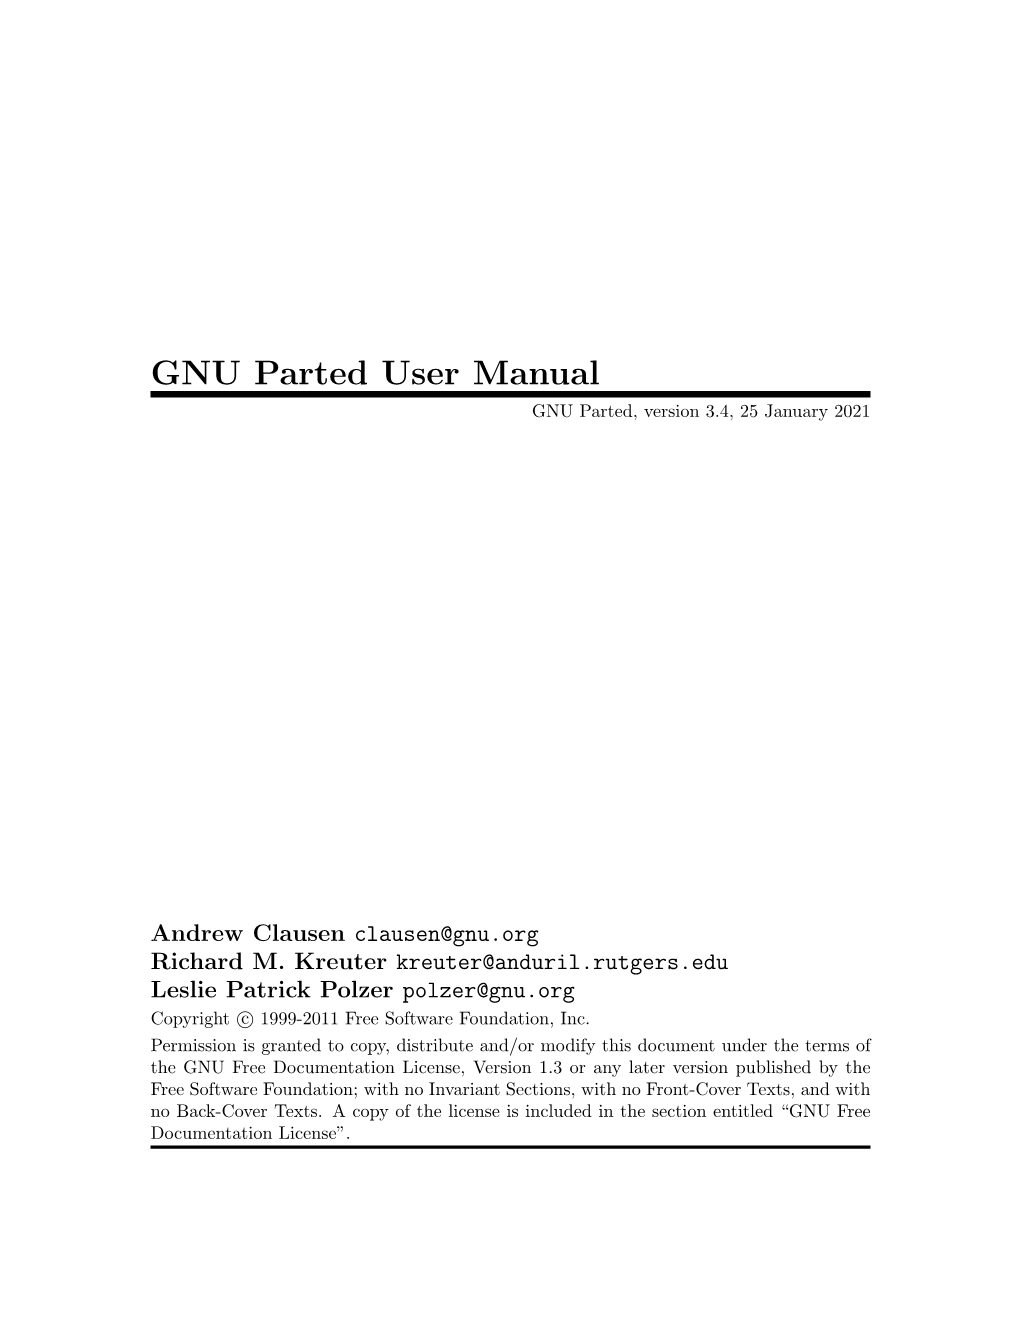 GNU Parted User Manual GNU Parted, Version 3.4, 25 January 2021